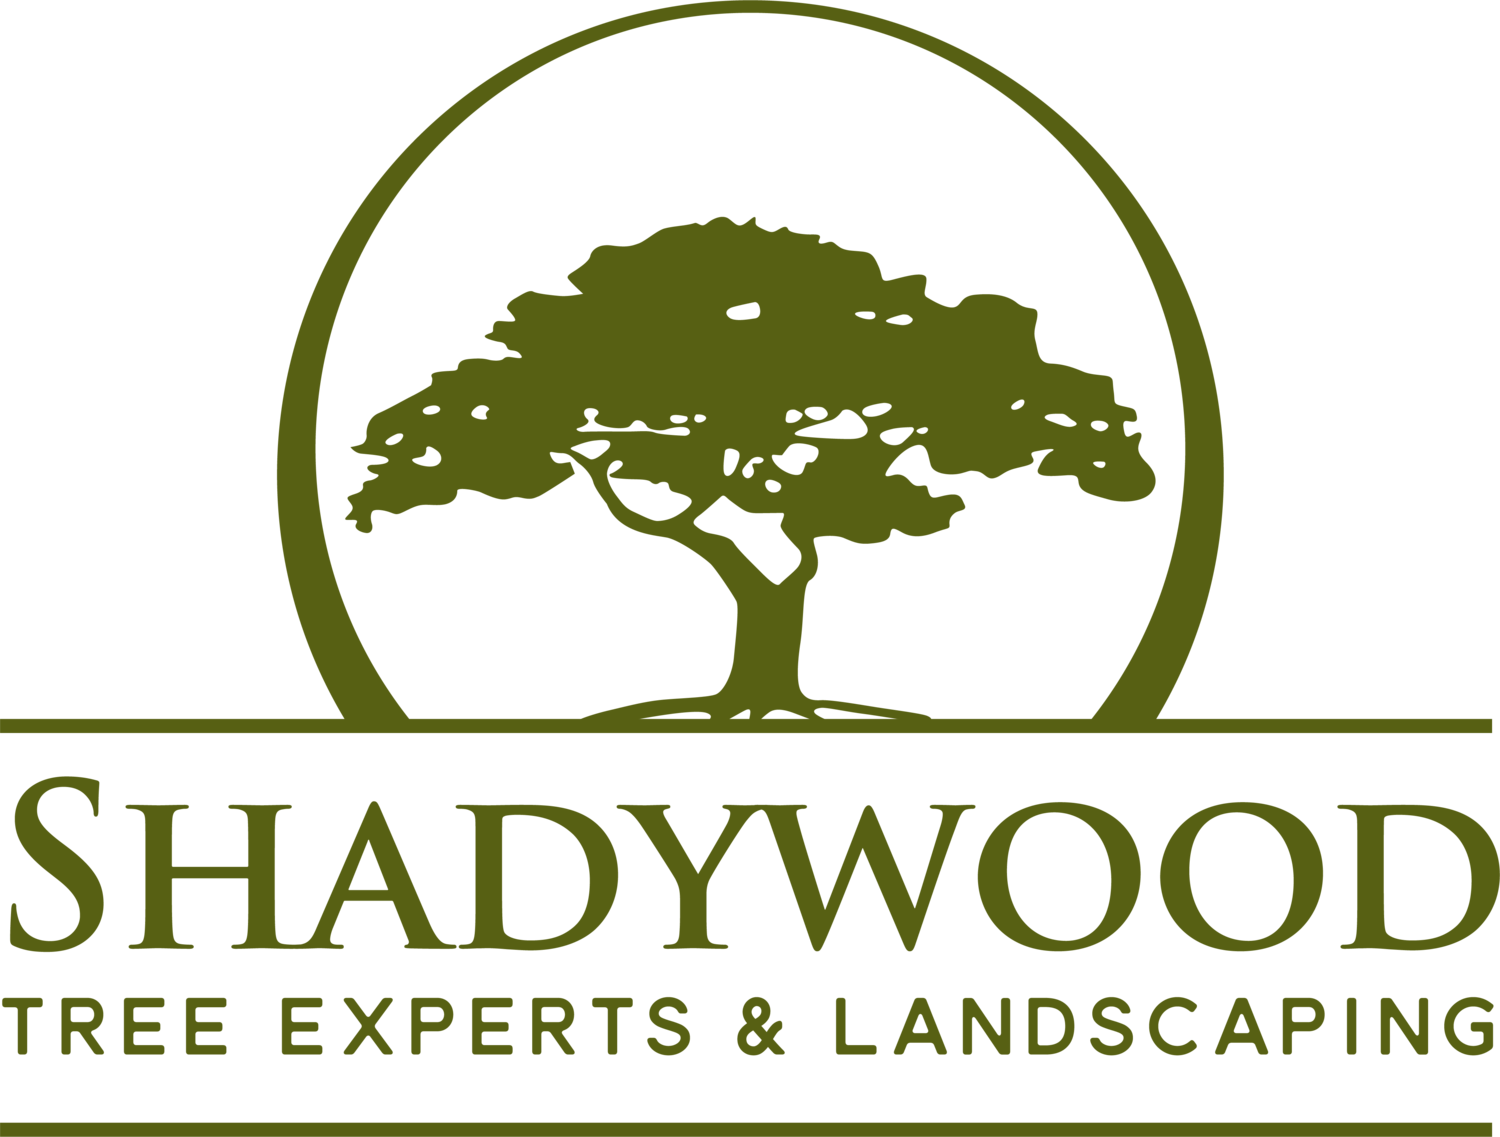 Shadywood Tree Experts and Landscaping